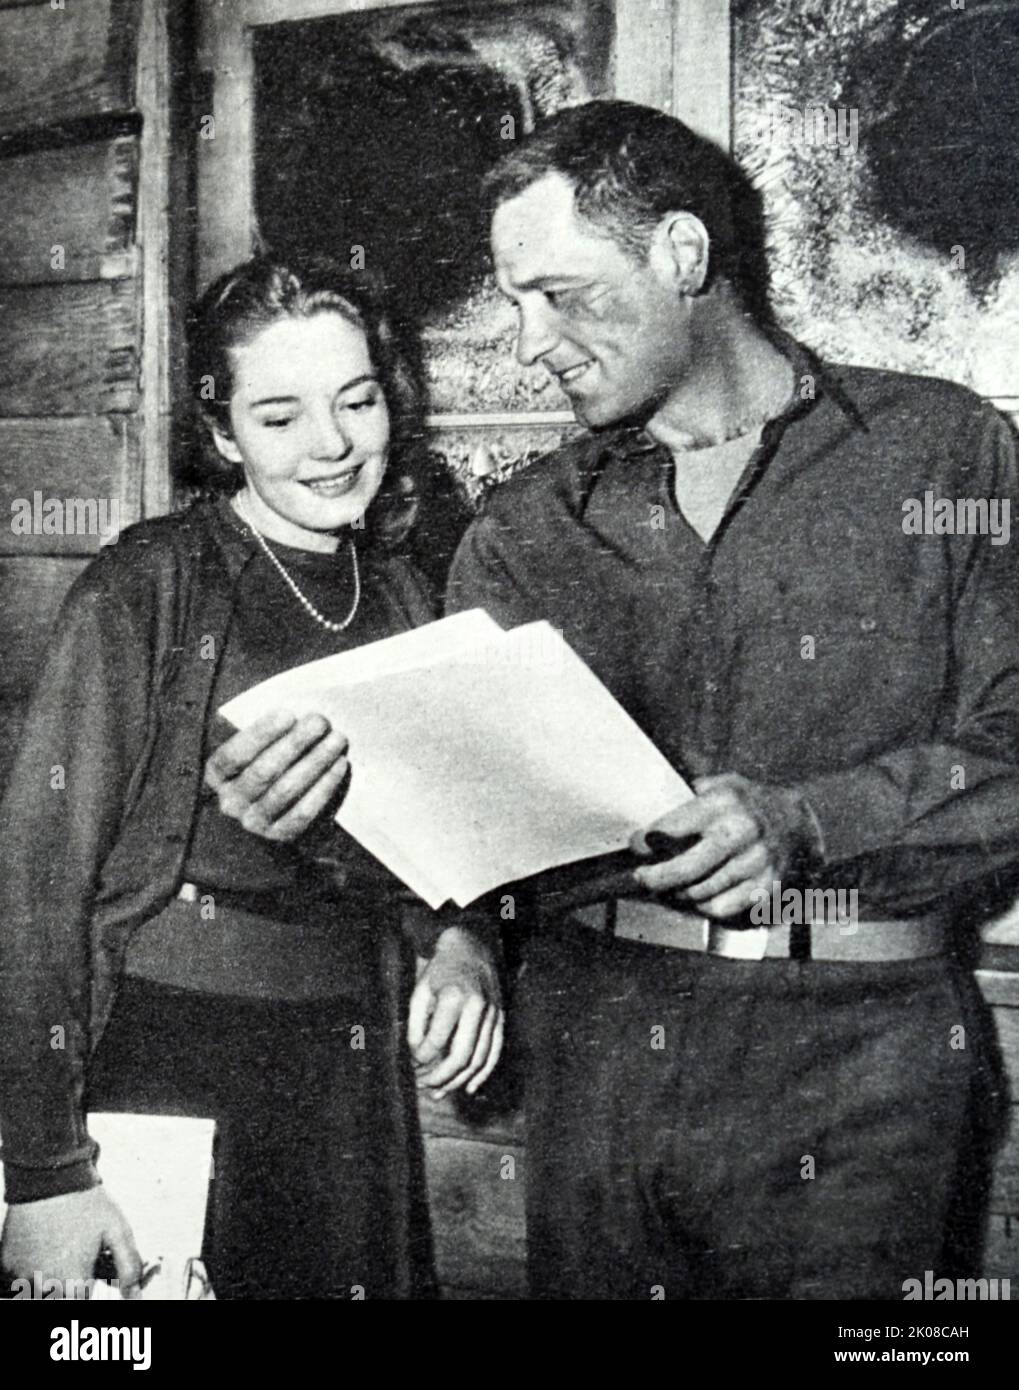 Billy Wilder and Suzanne Cloutier on the set of Stalag 17 is a 1953 American war film. Billy Wilder (born Samuel Wilder; June 22, 1906 - March 27, 2002) was an Austrian-American film director, producer and screenwriter. Suzanne Cloutier (July 10, 1923 - December 2, 2003) was a Canadian film actress Stock Photo